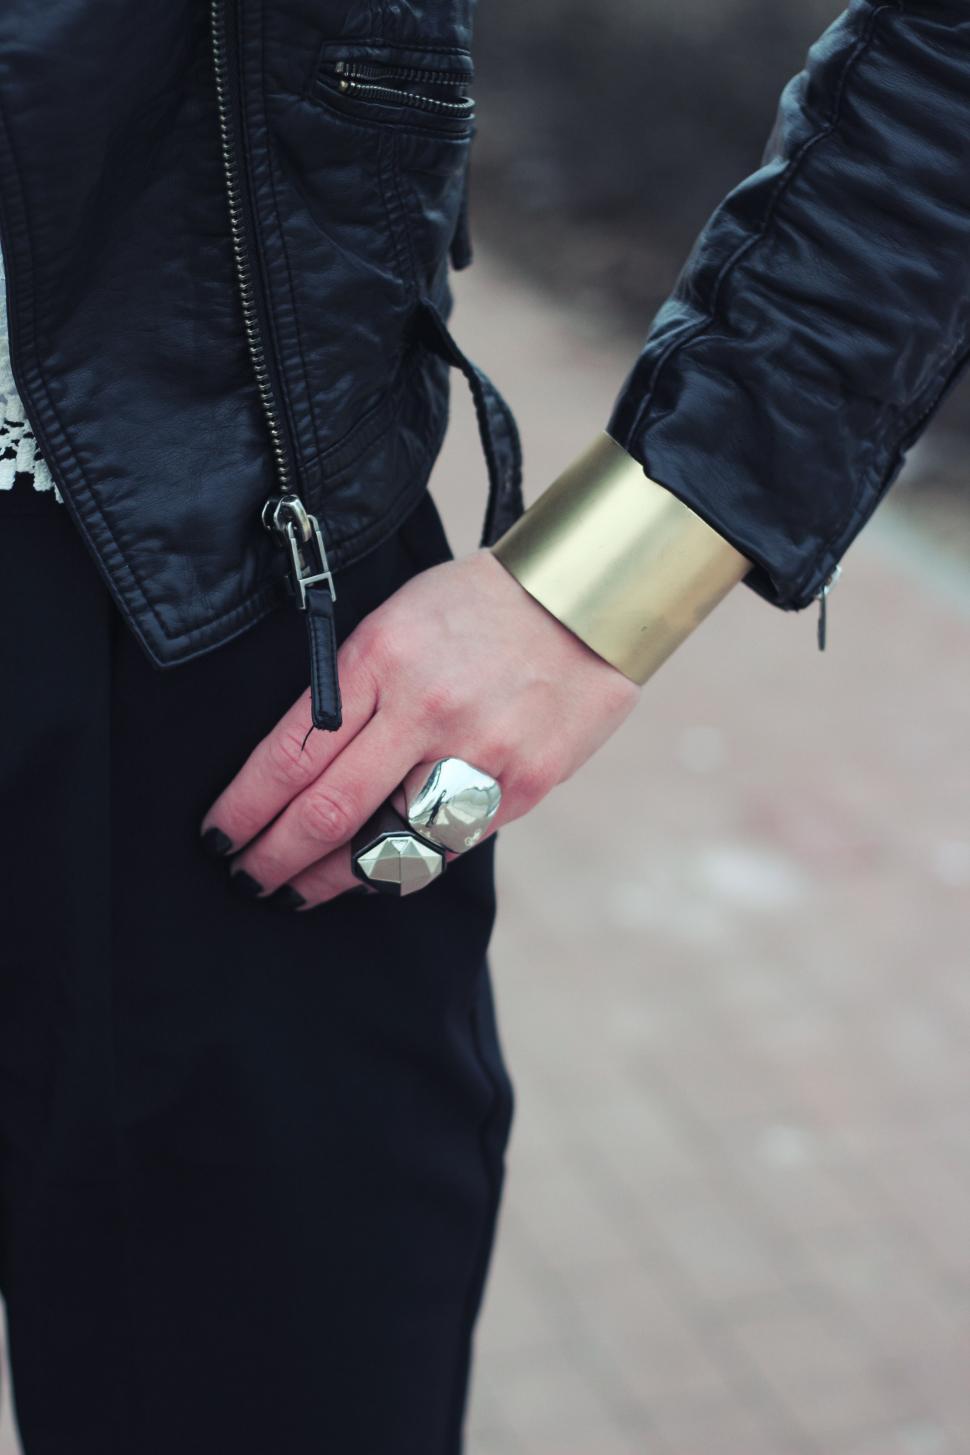 Free Image of Person Wearing Black Jacket and Gold Ring 